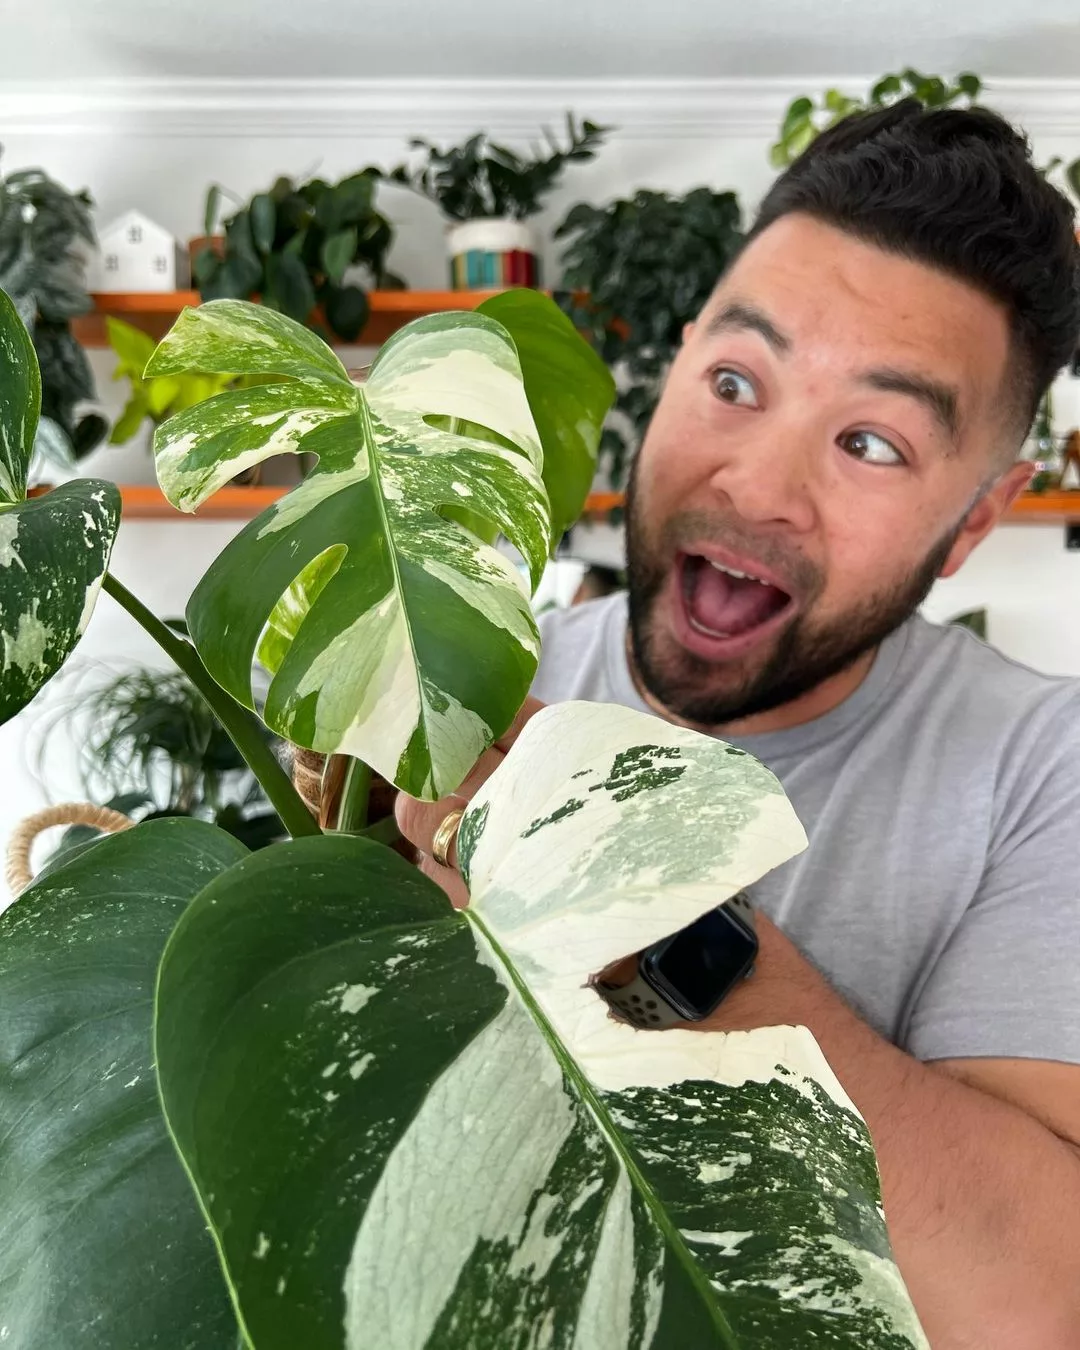 Jeff of _thevibespace holding a big plant